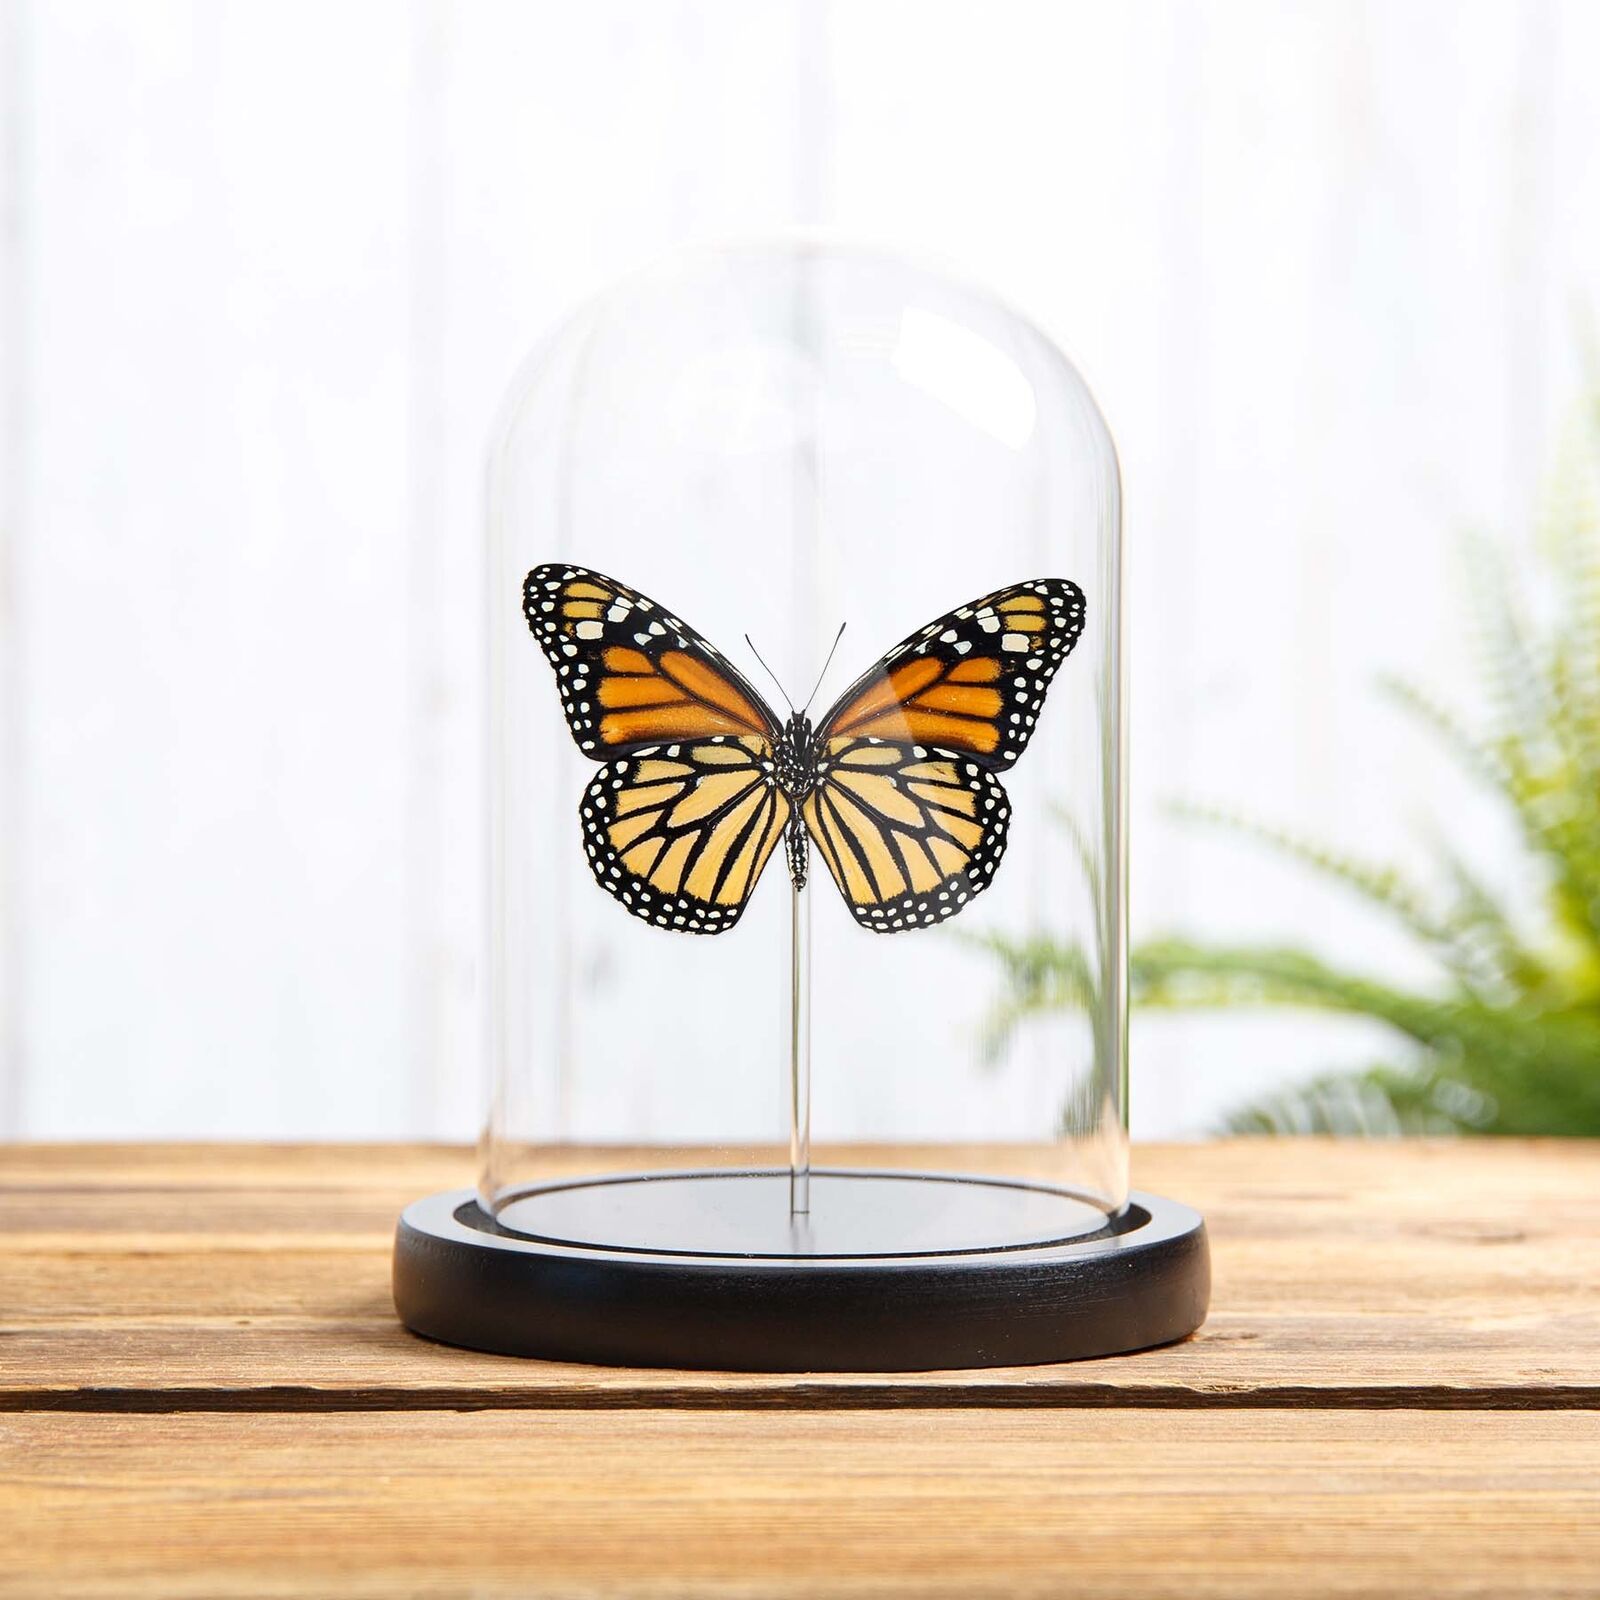 Female Monarch Butterfly Ventral Side Taxidermy in Glass Dome With Wooden Base (